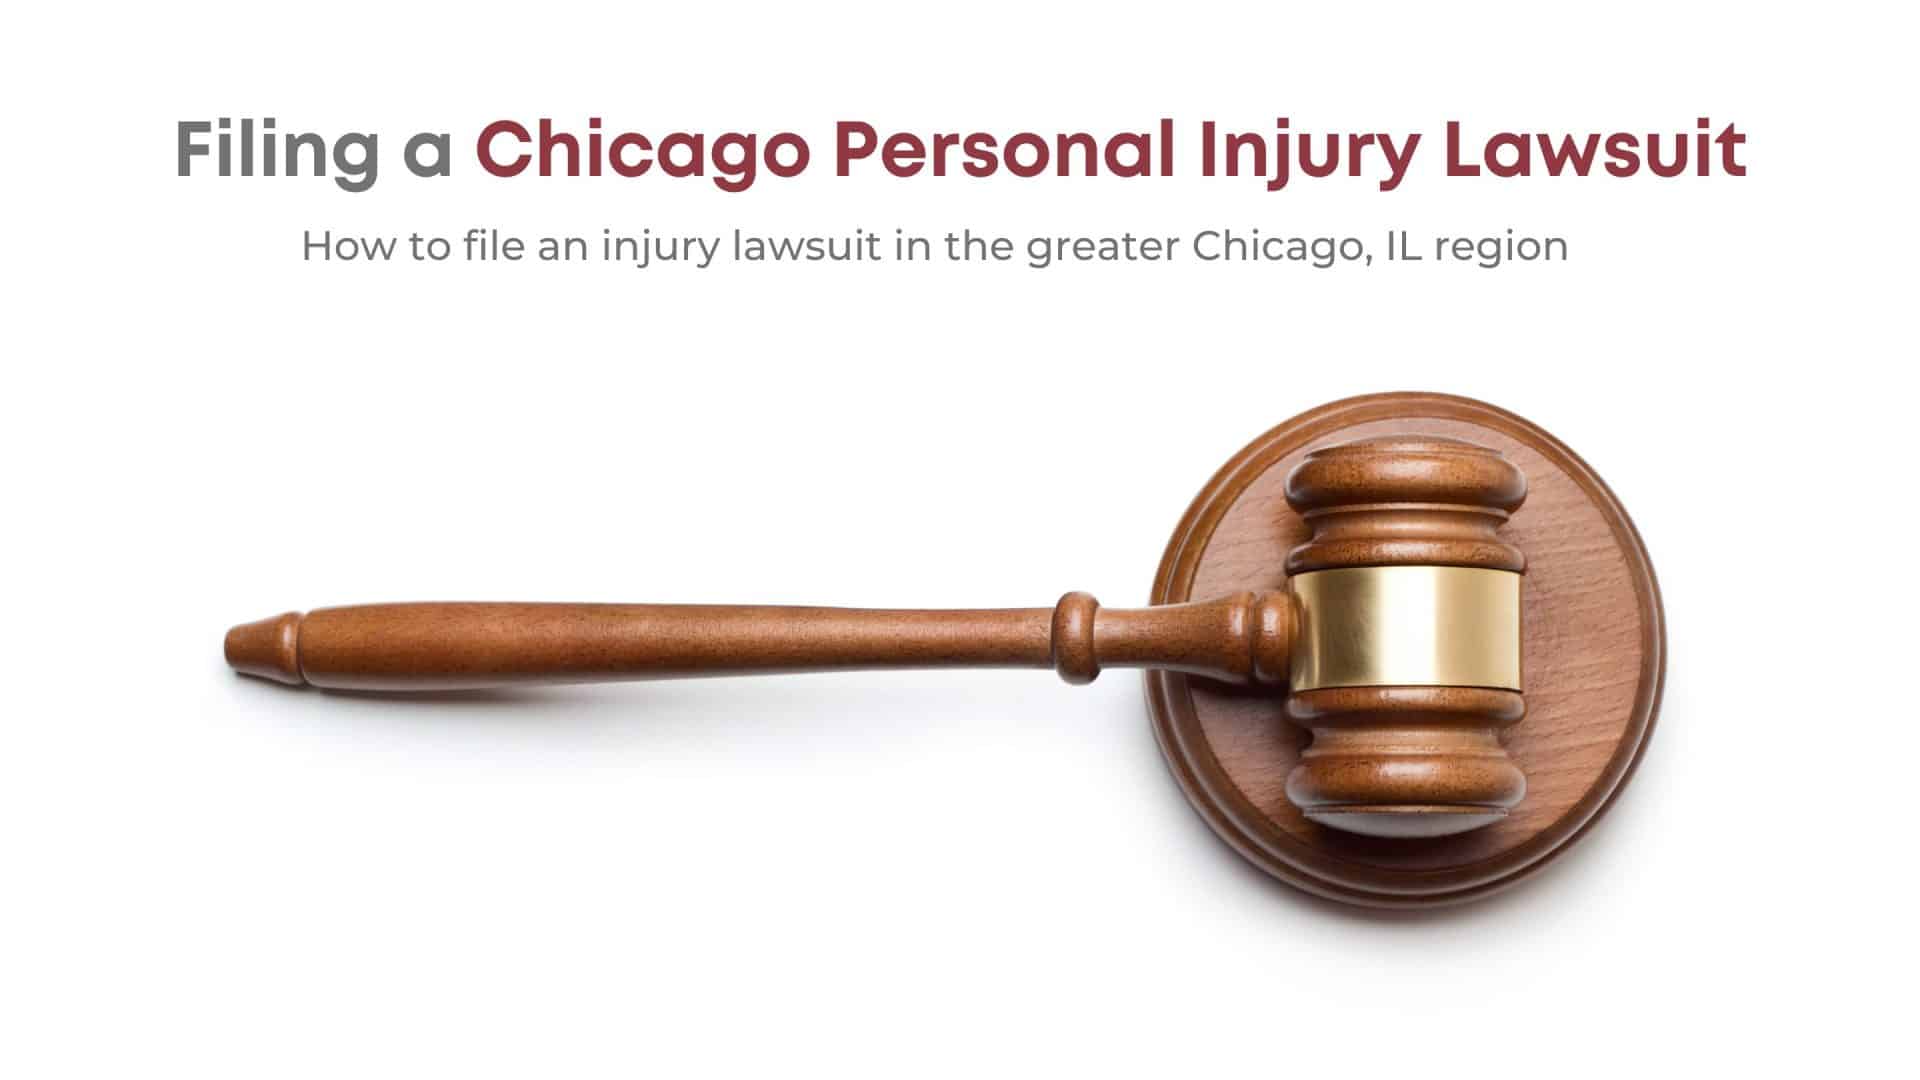 How Do I File A Chicago Personal Injury Lawsuit?